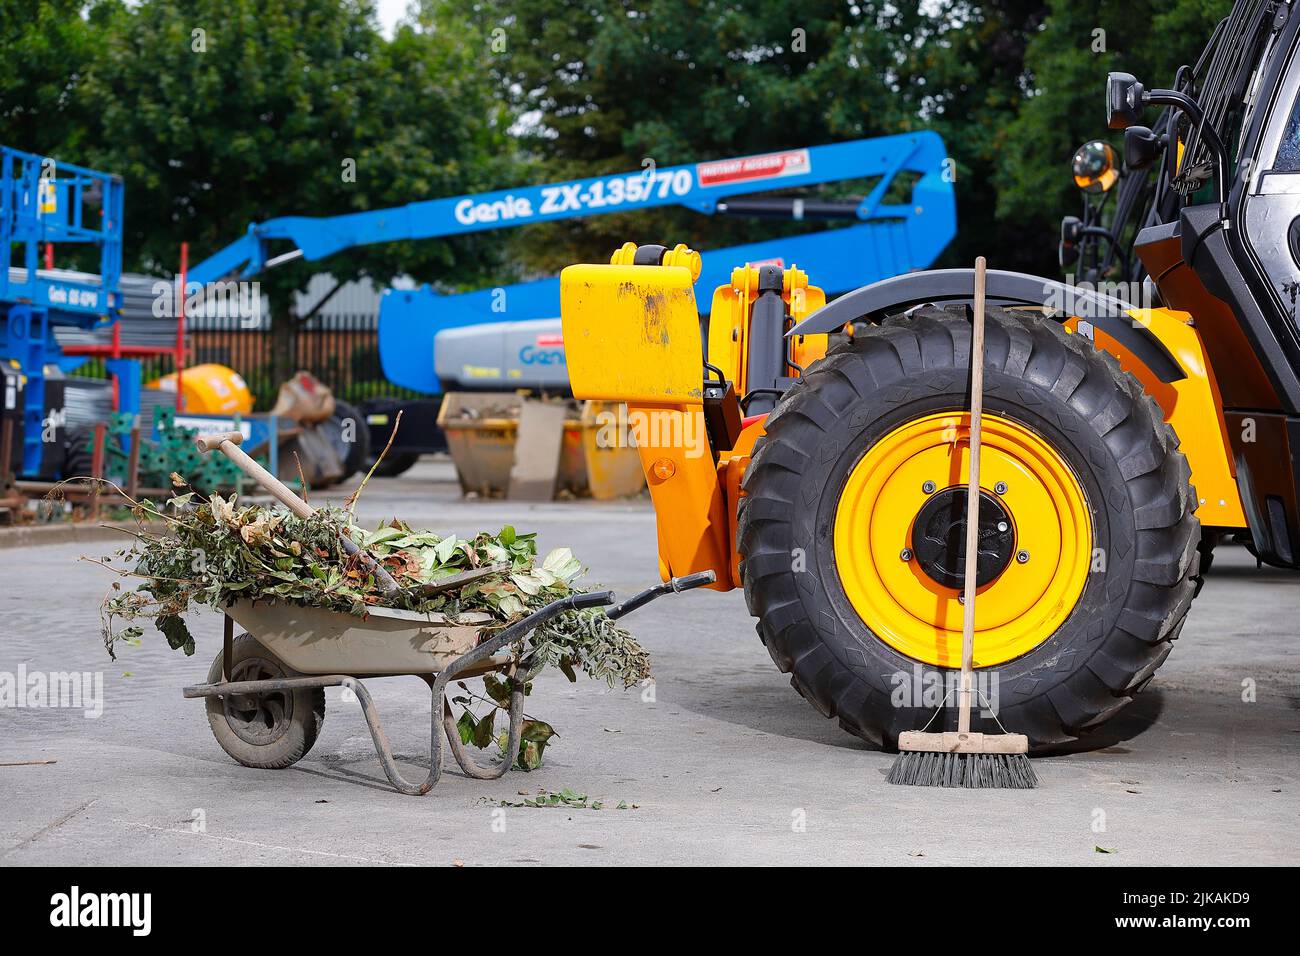 A wheelbarrow and brush pictured with JCB Telehandlers at a plant hire yard Stock Photo